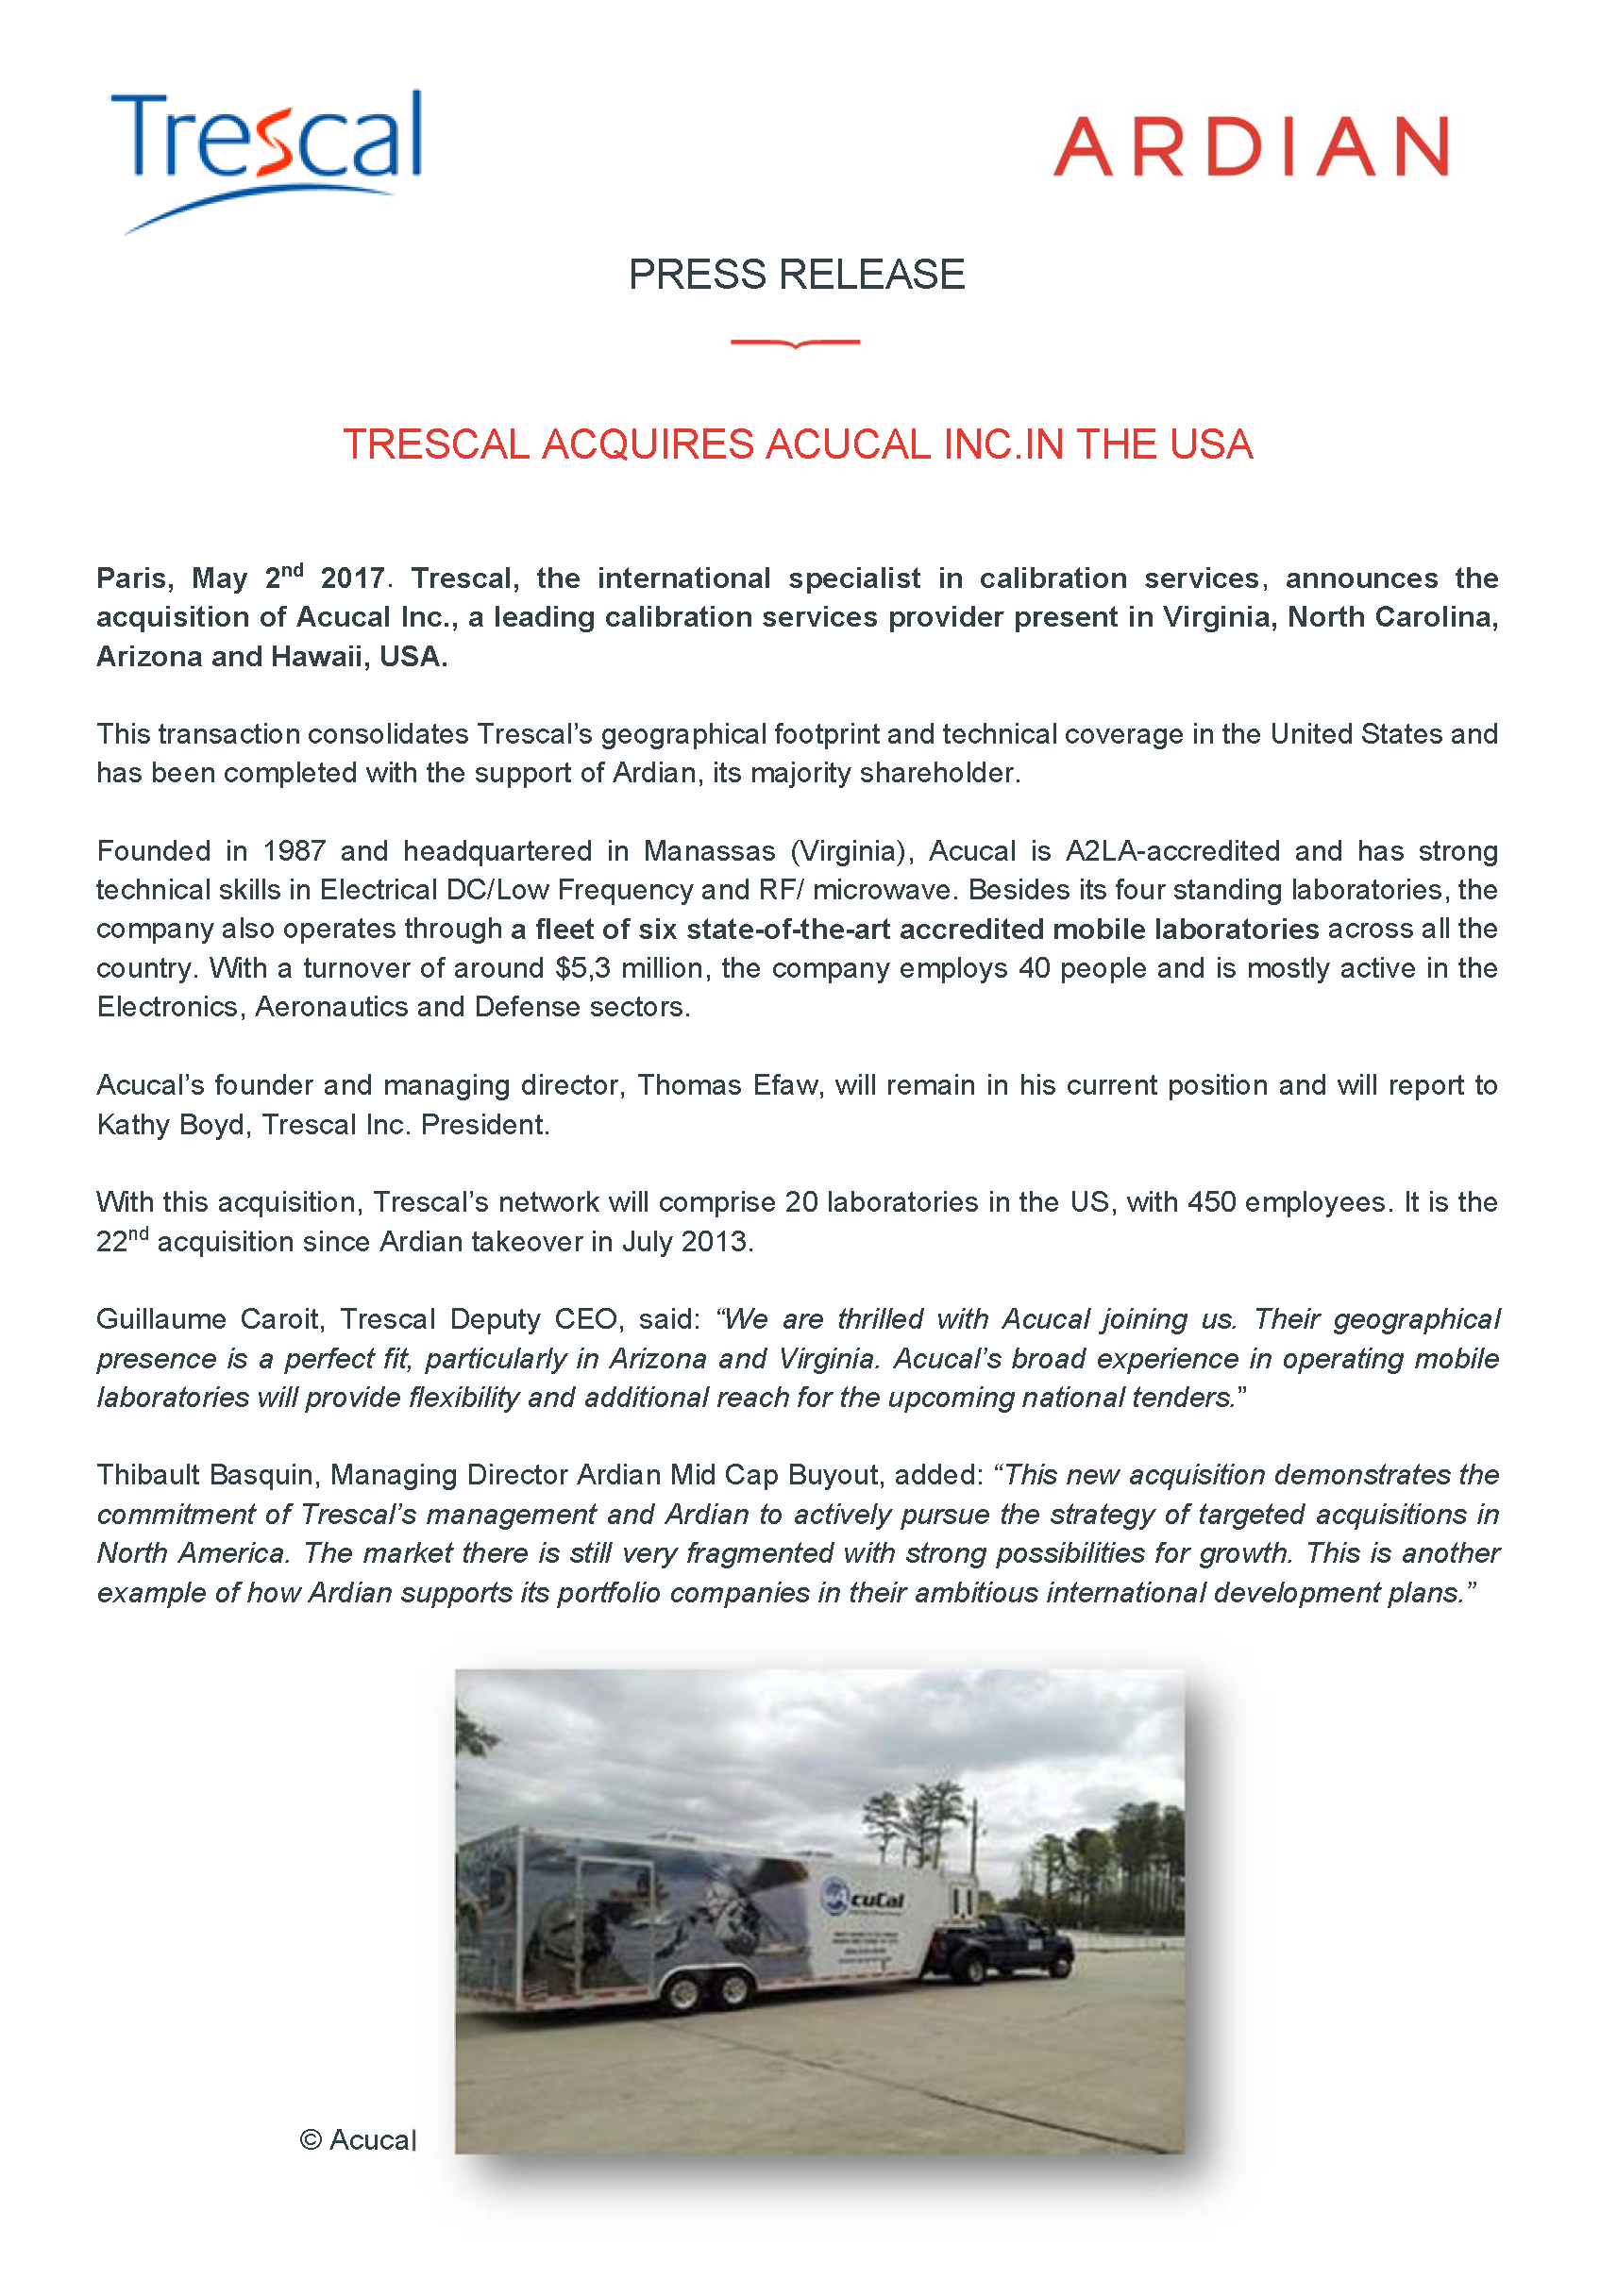 Trescal Acquires Acucal Inc. in the USA